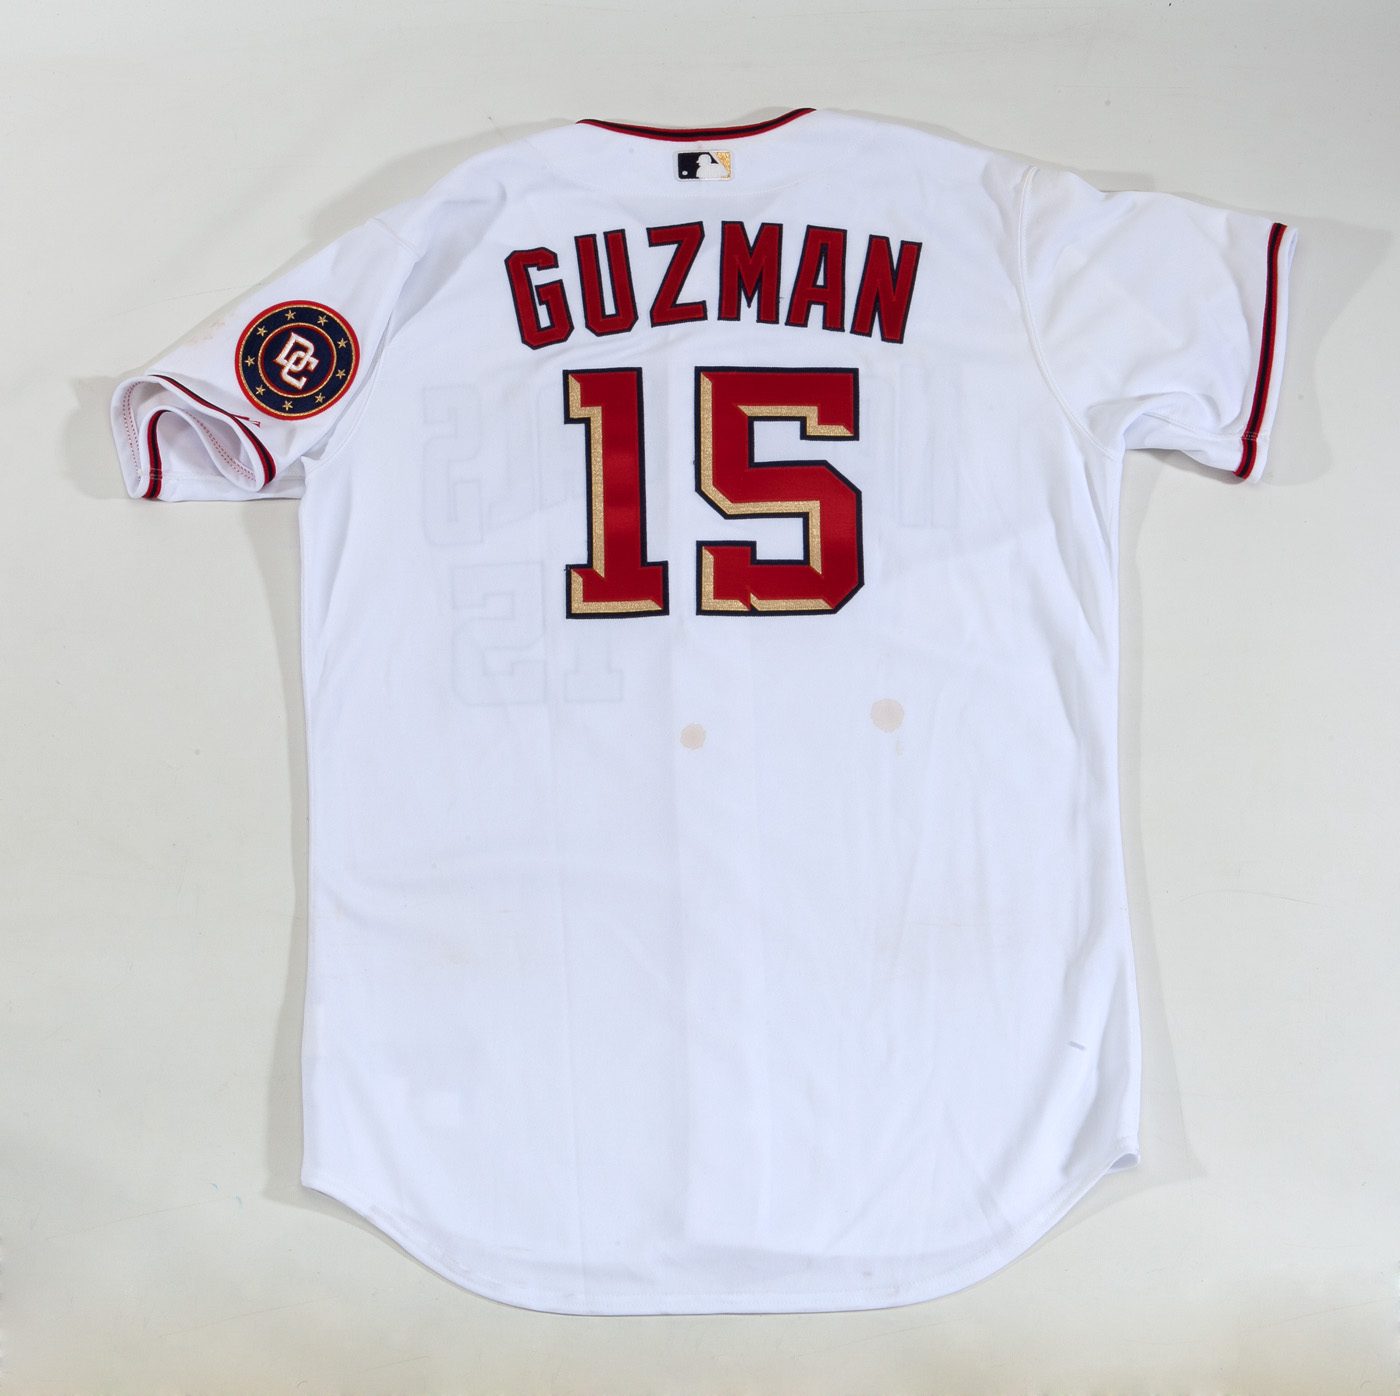 Lot Detail - 2008 CHRISTIAN GUZMAN WASHINGTON NATIONALS GAME WORN HOME  JERSEY AND 2008 OPENING DAY (FIRST GAME AT NATIONALS PARK) GAME WORN CAP -  GUZMAN RECORDED FIRST HIT IN NATIONALS PARK! (MLB AUTH.)